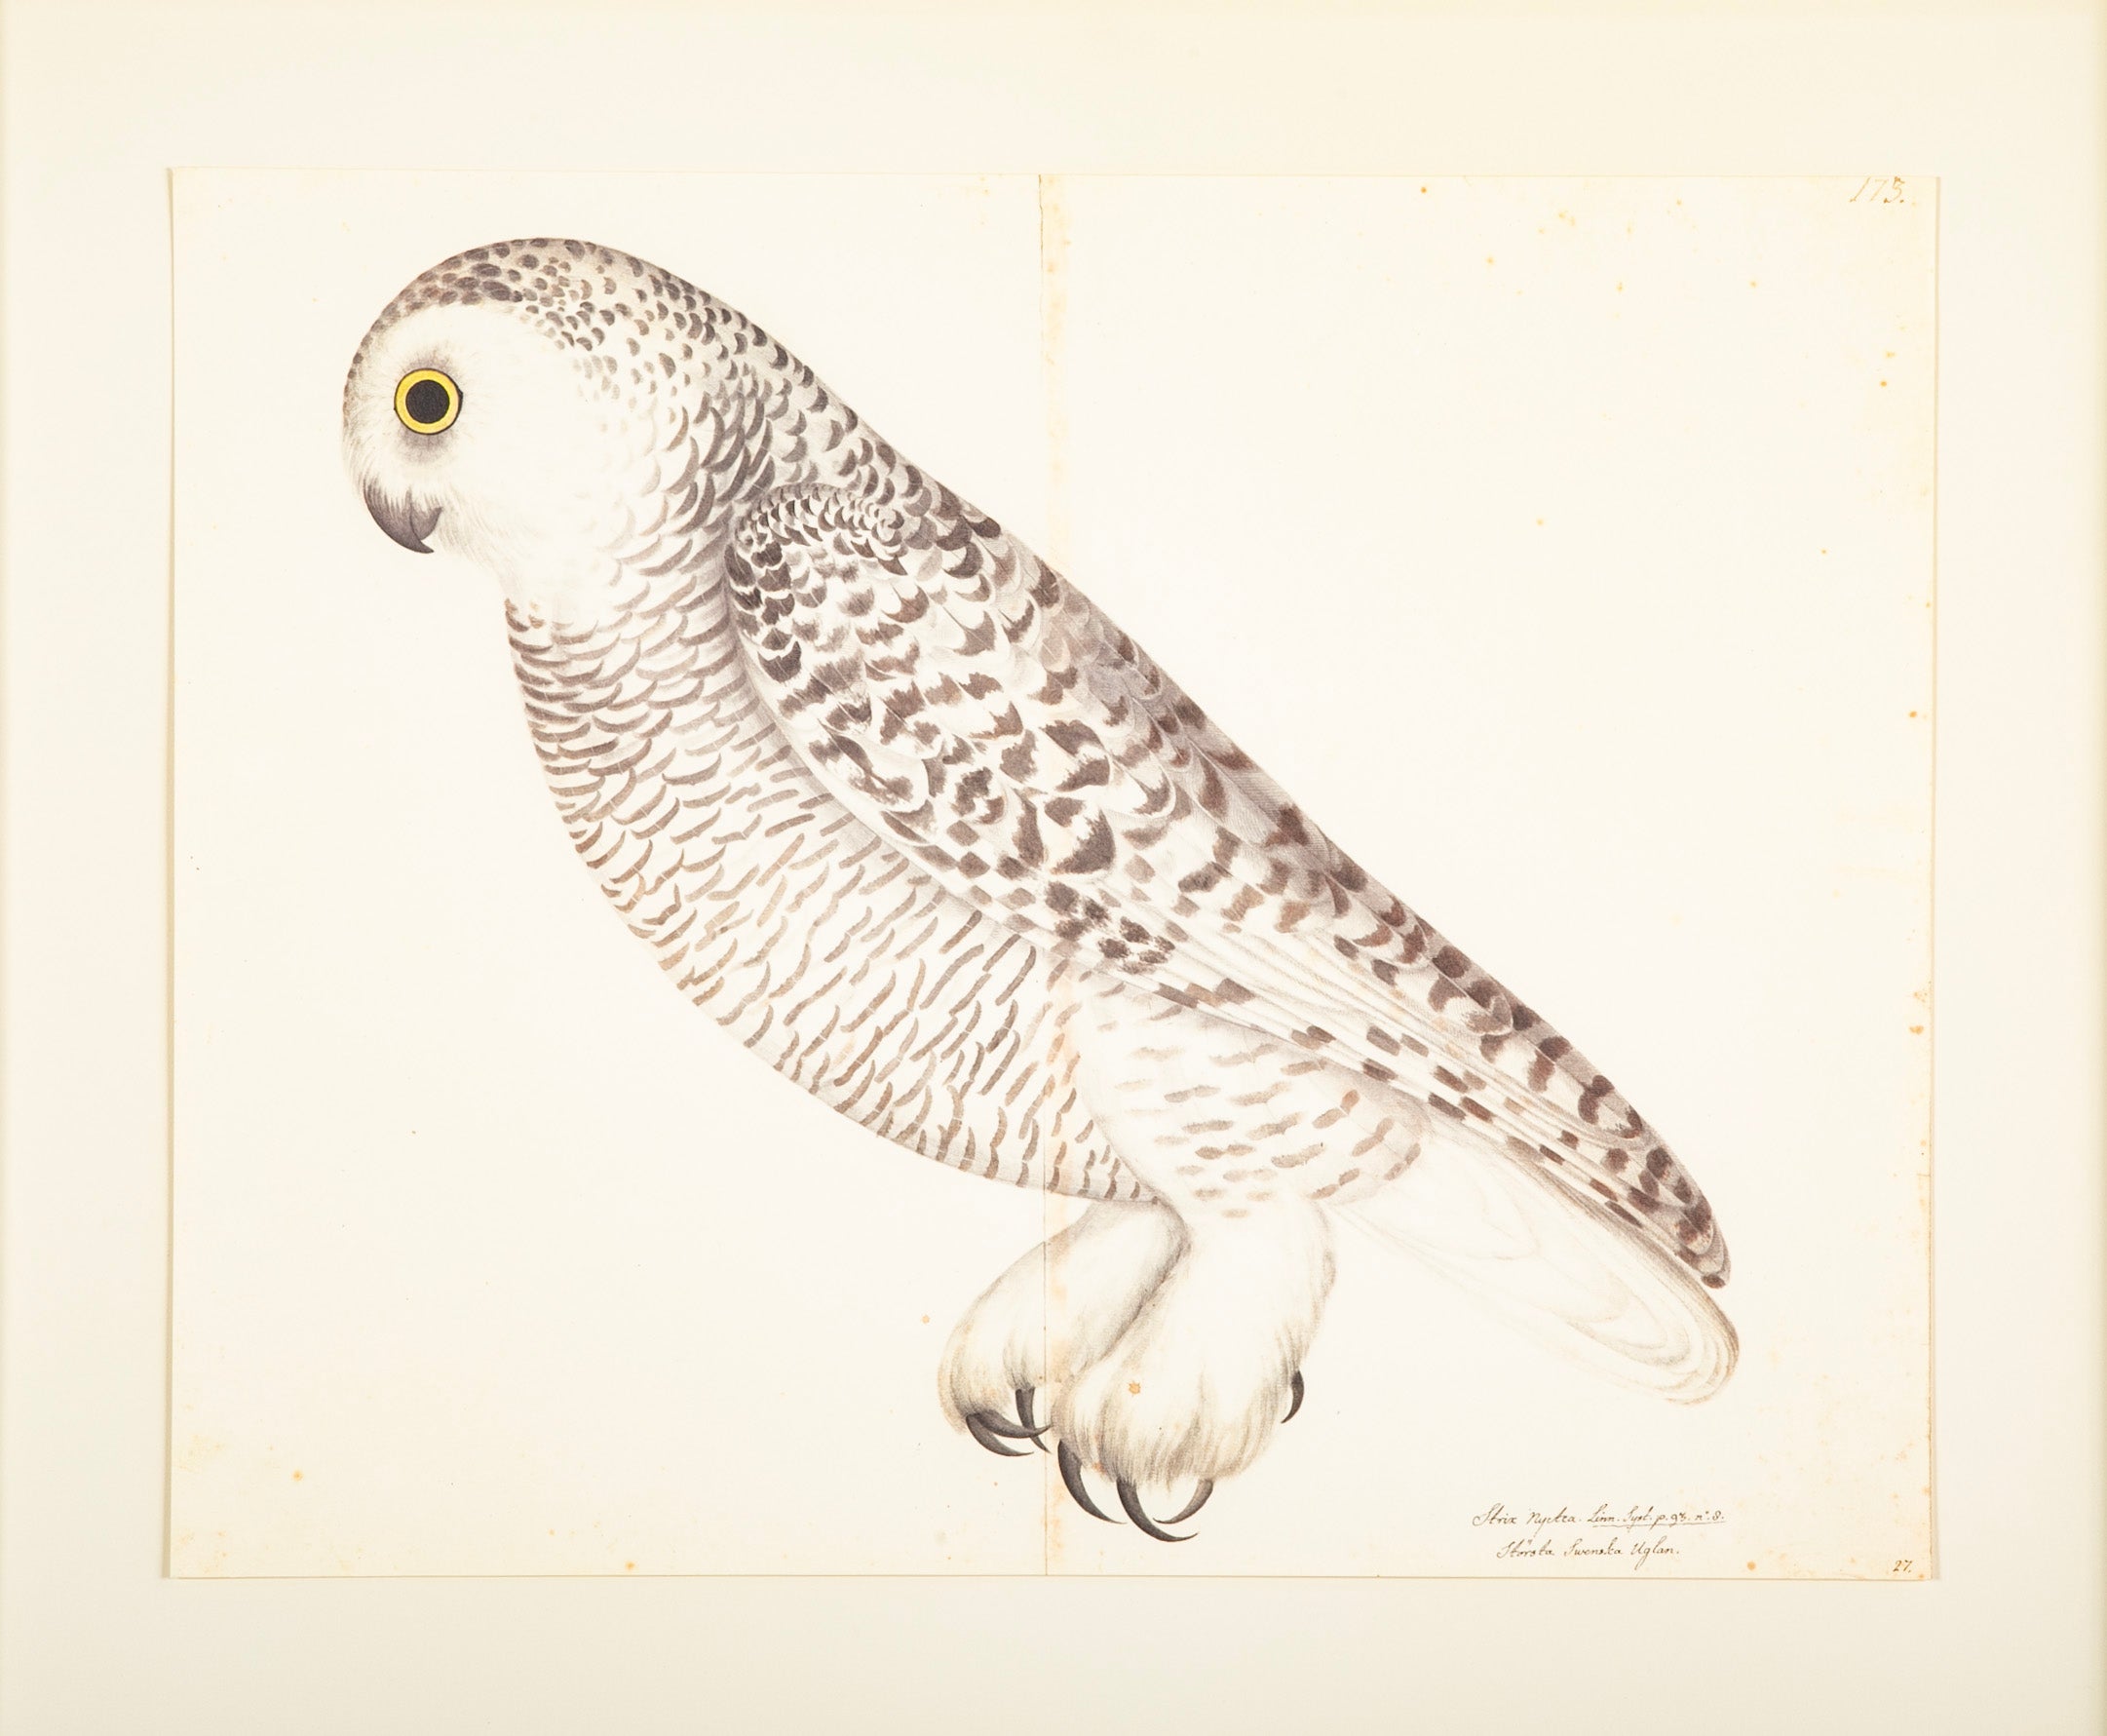 Offset Lithograph - Profile of "White Owl" from the "The Great Bird Book" by Olaf Rudbeck The Younger (1660-1740)